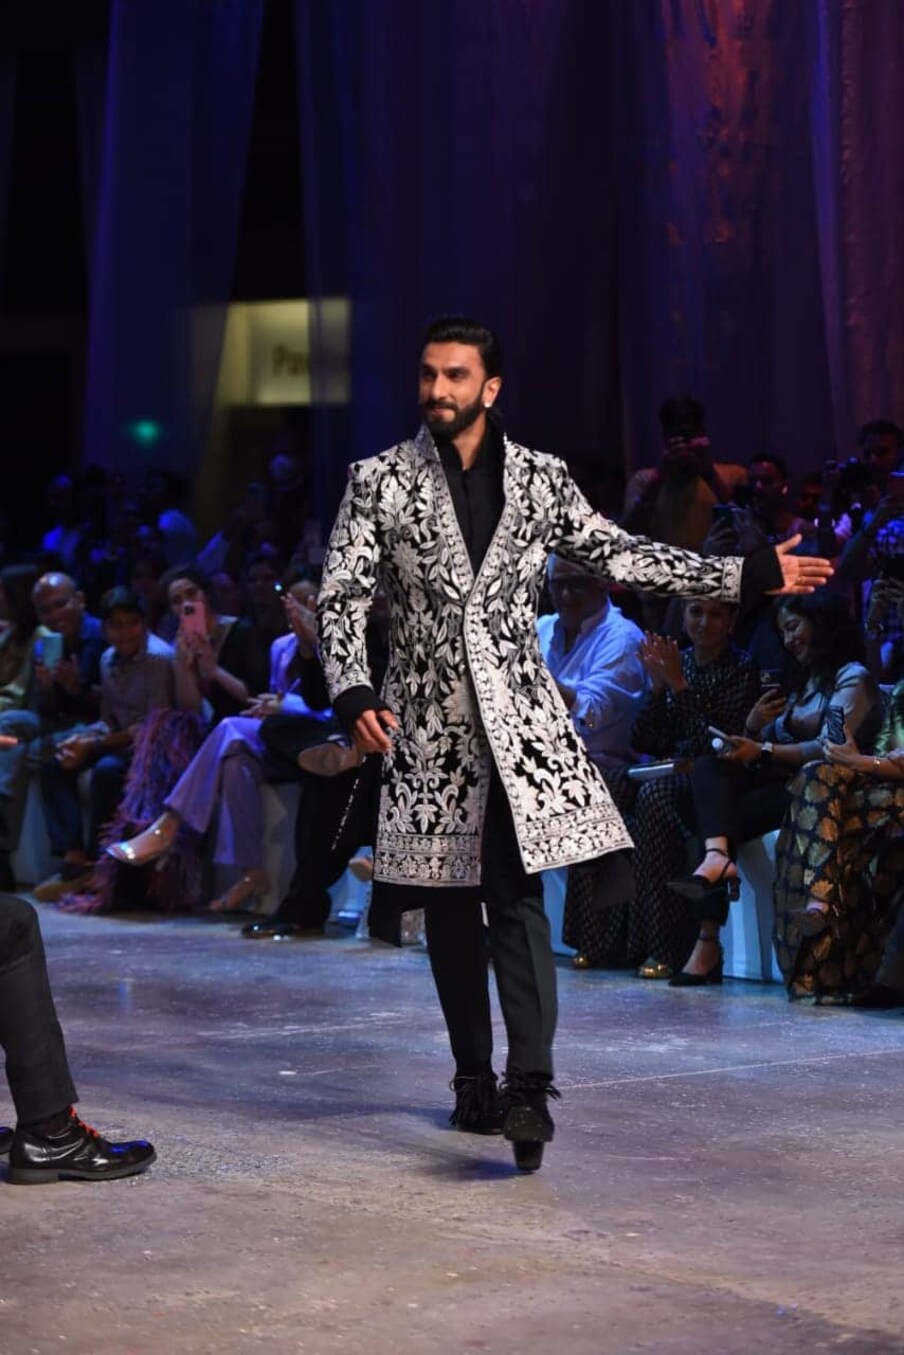   The special thing is that Ranveer Singh walked the ramp with wife and actress Deepika Padukone at Mijwan 2022 fashion show.  During this, Ranveer appeared in a royal sherwani and pajama.  (Photo Credits: Viral Bhayani)